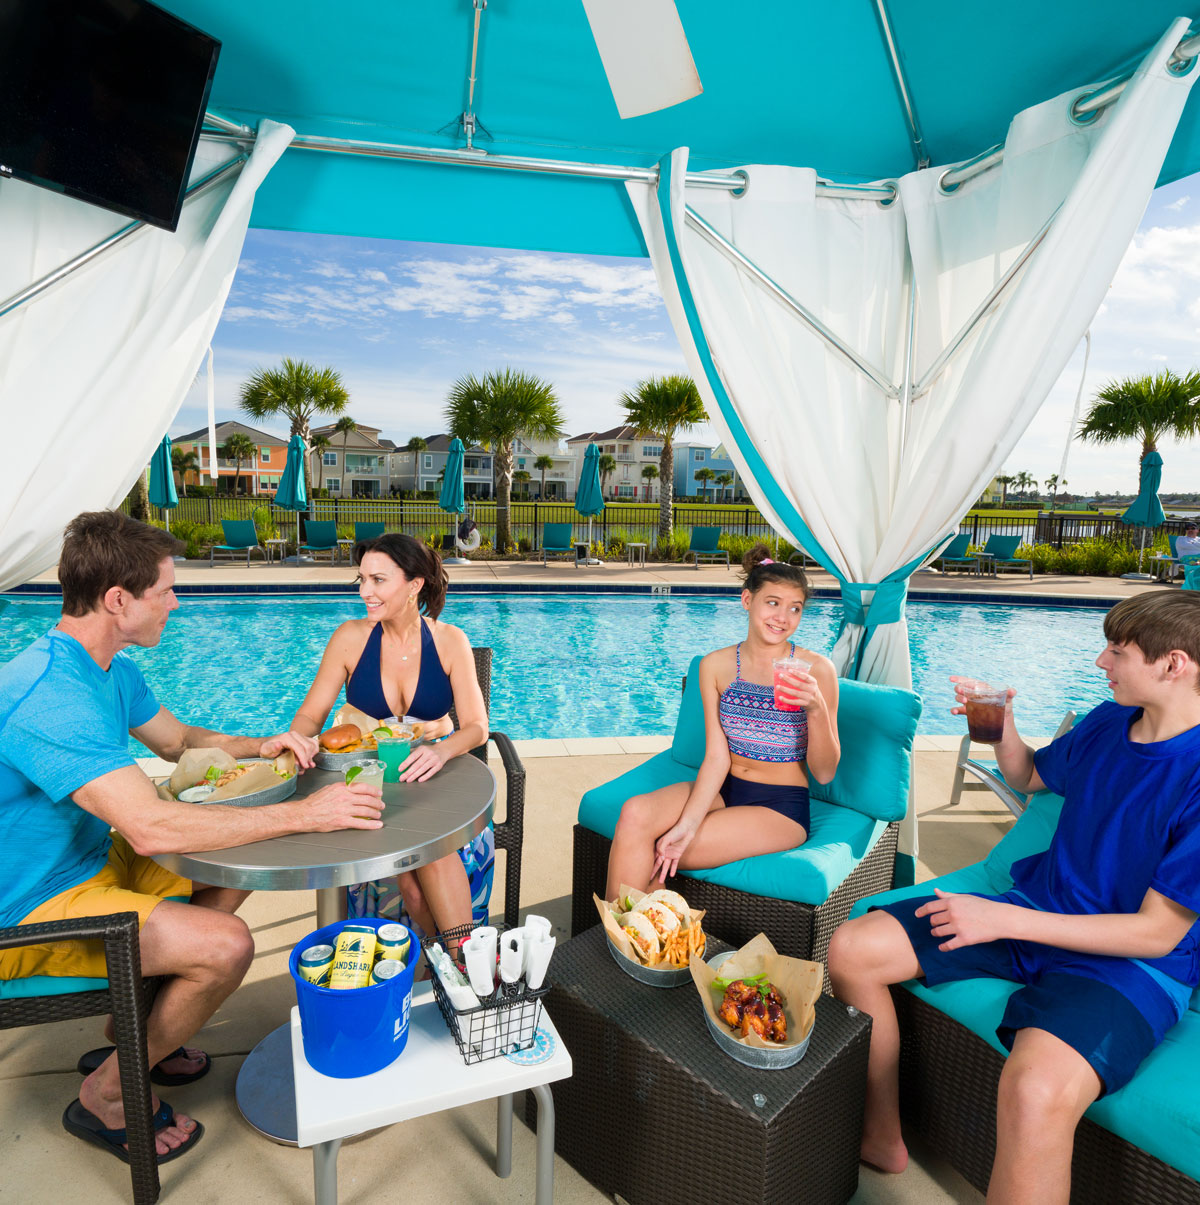 Family of a mom, dad, and two children sharing snacks and drinks under a private cabana at Margaritaville Resort Orlando.